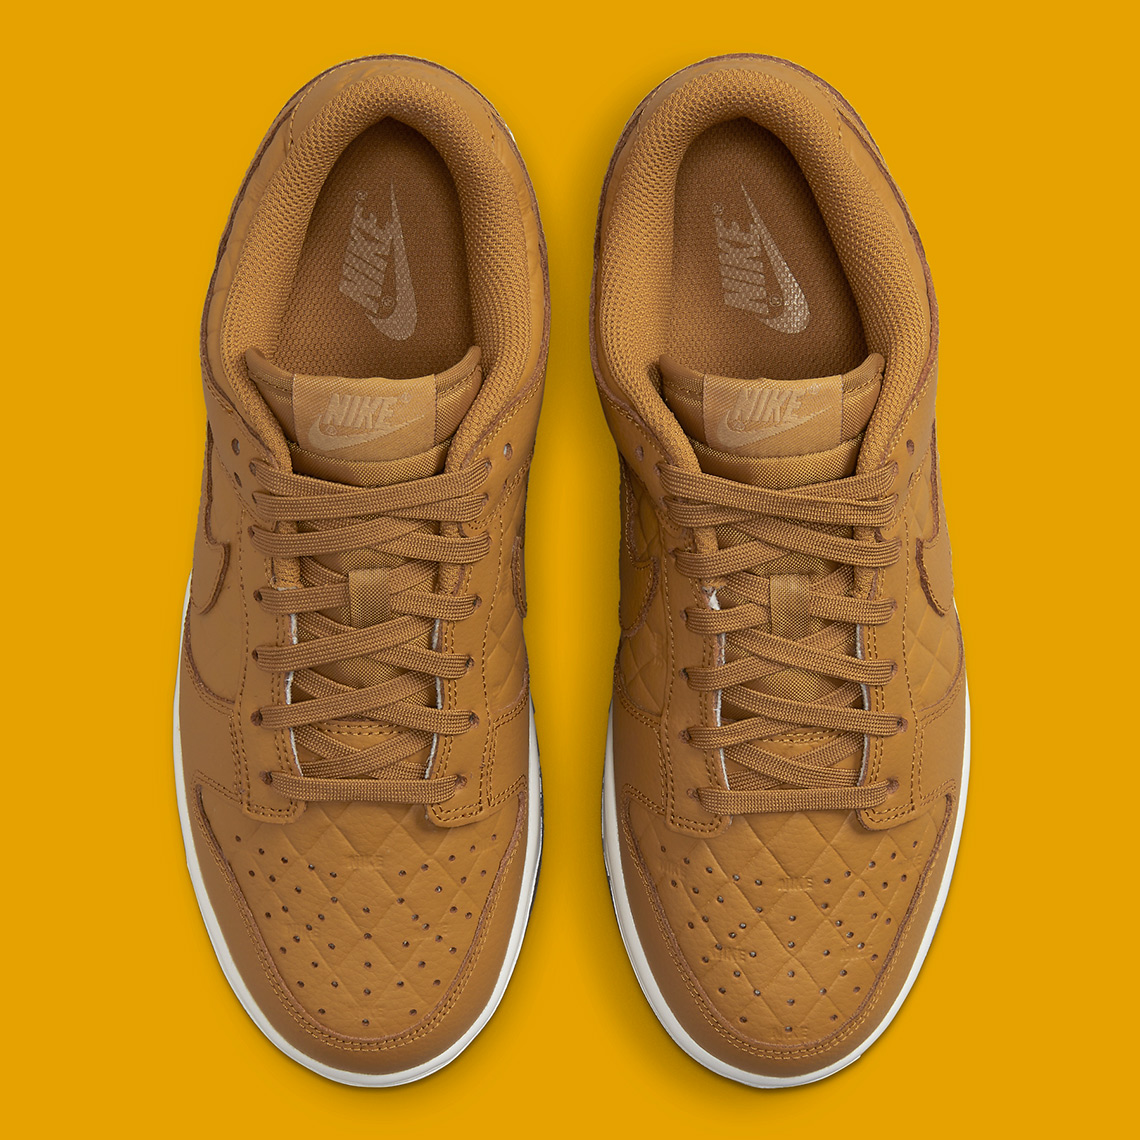 Nike Dunk Low Quilted Wheat Dx3374 700 6